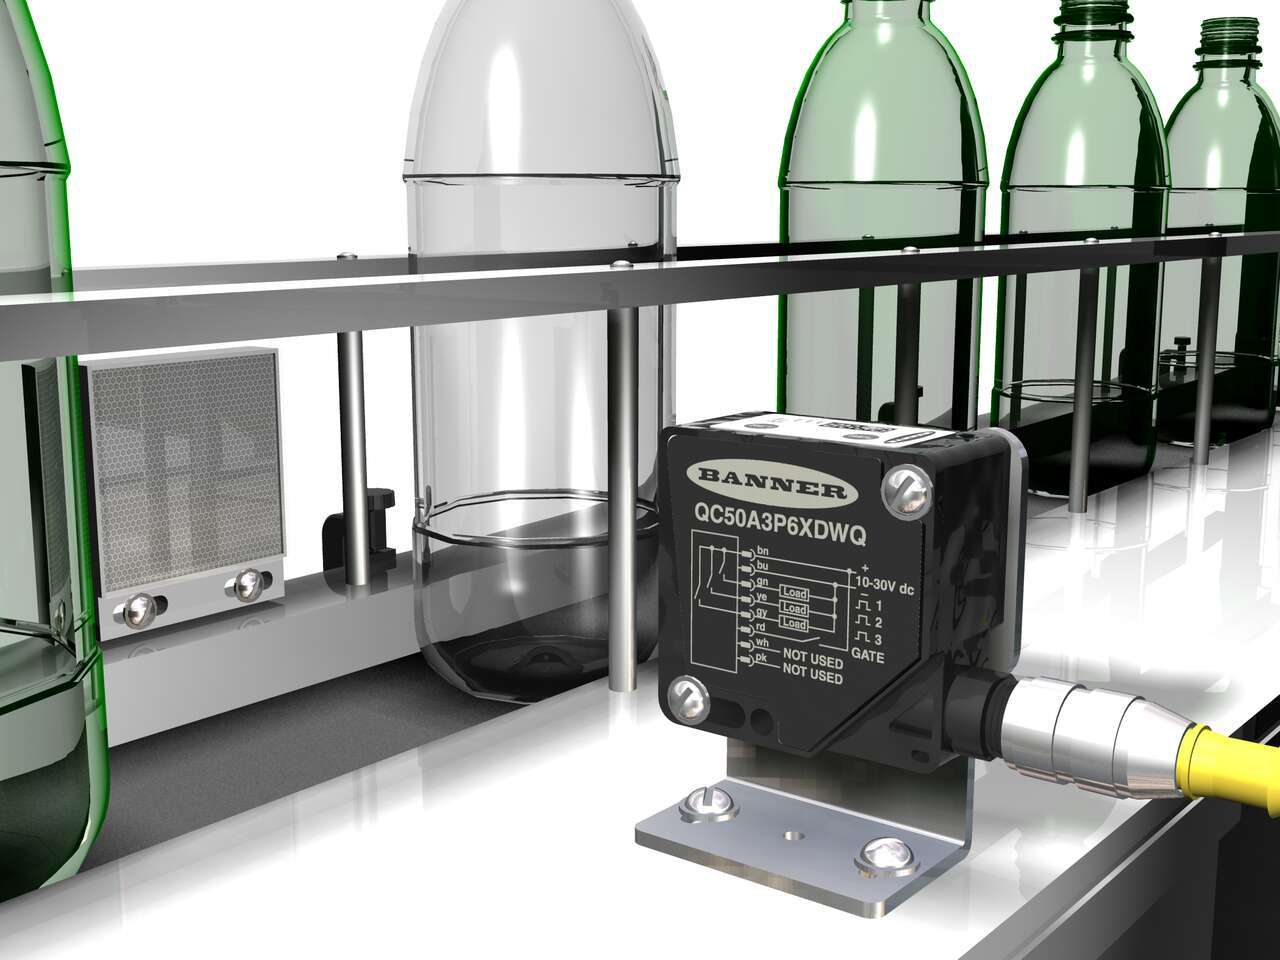 Color Sensor Automates Sorting of Clear and Tinted Bottles